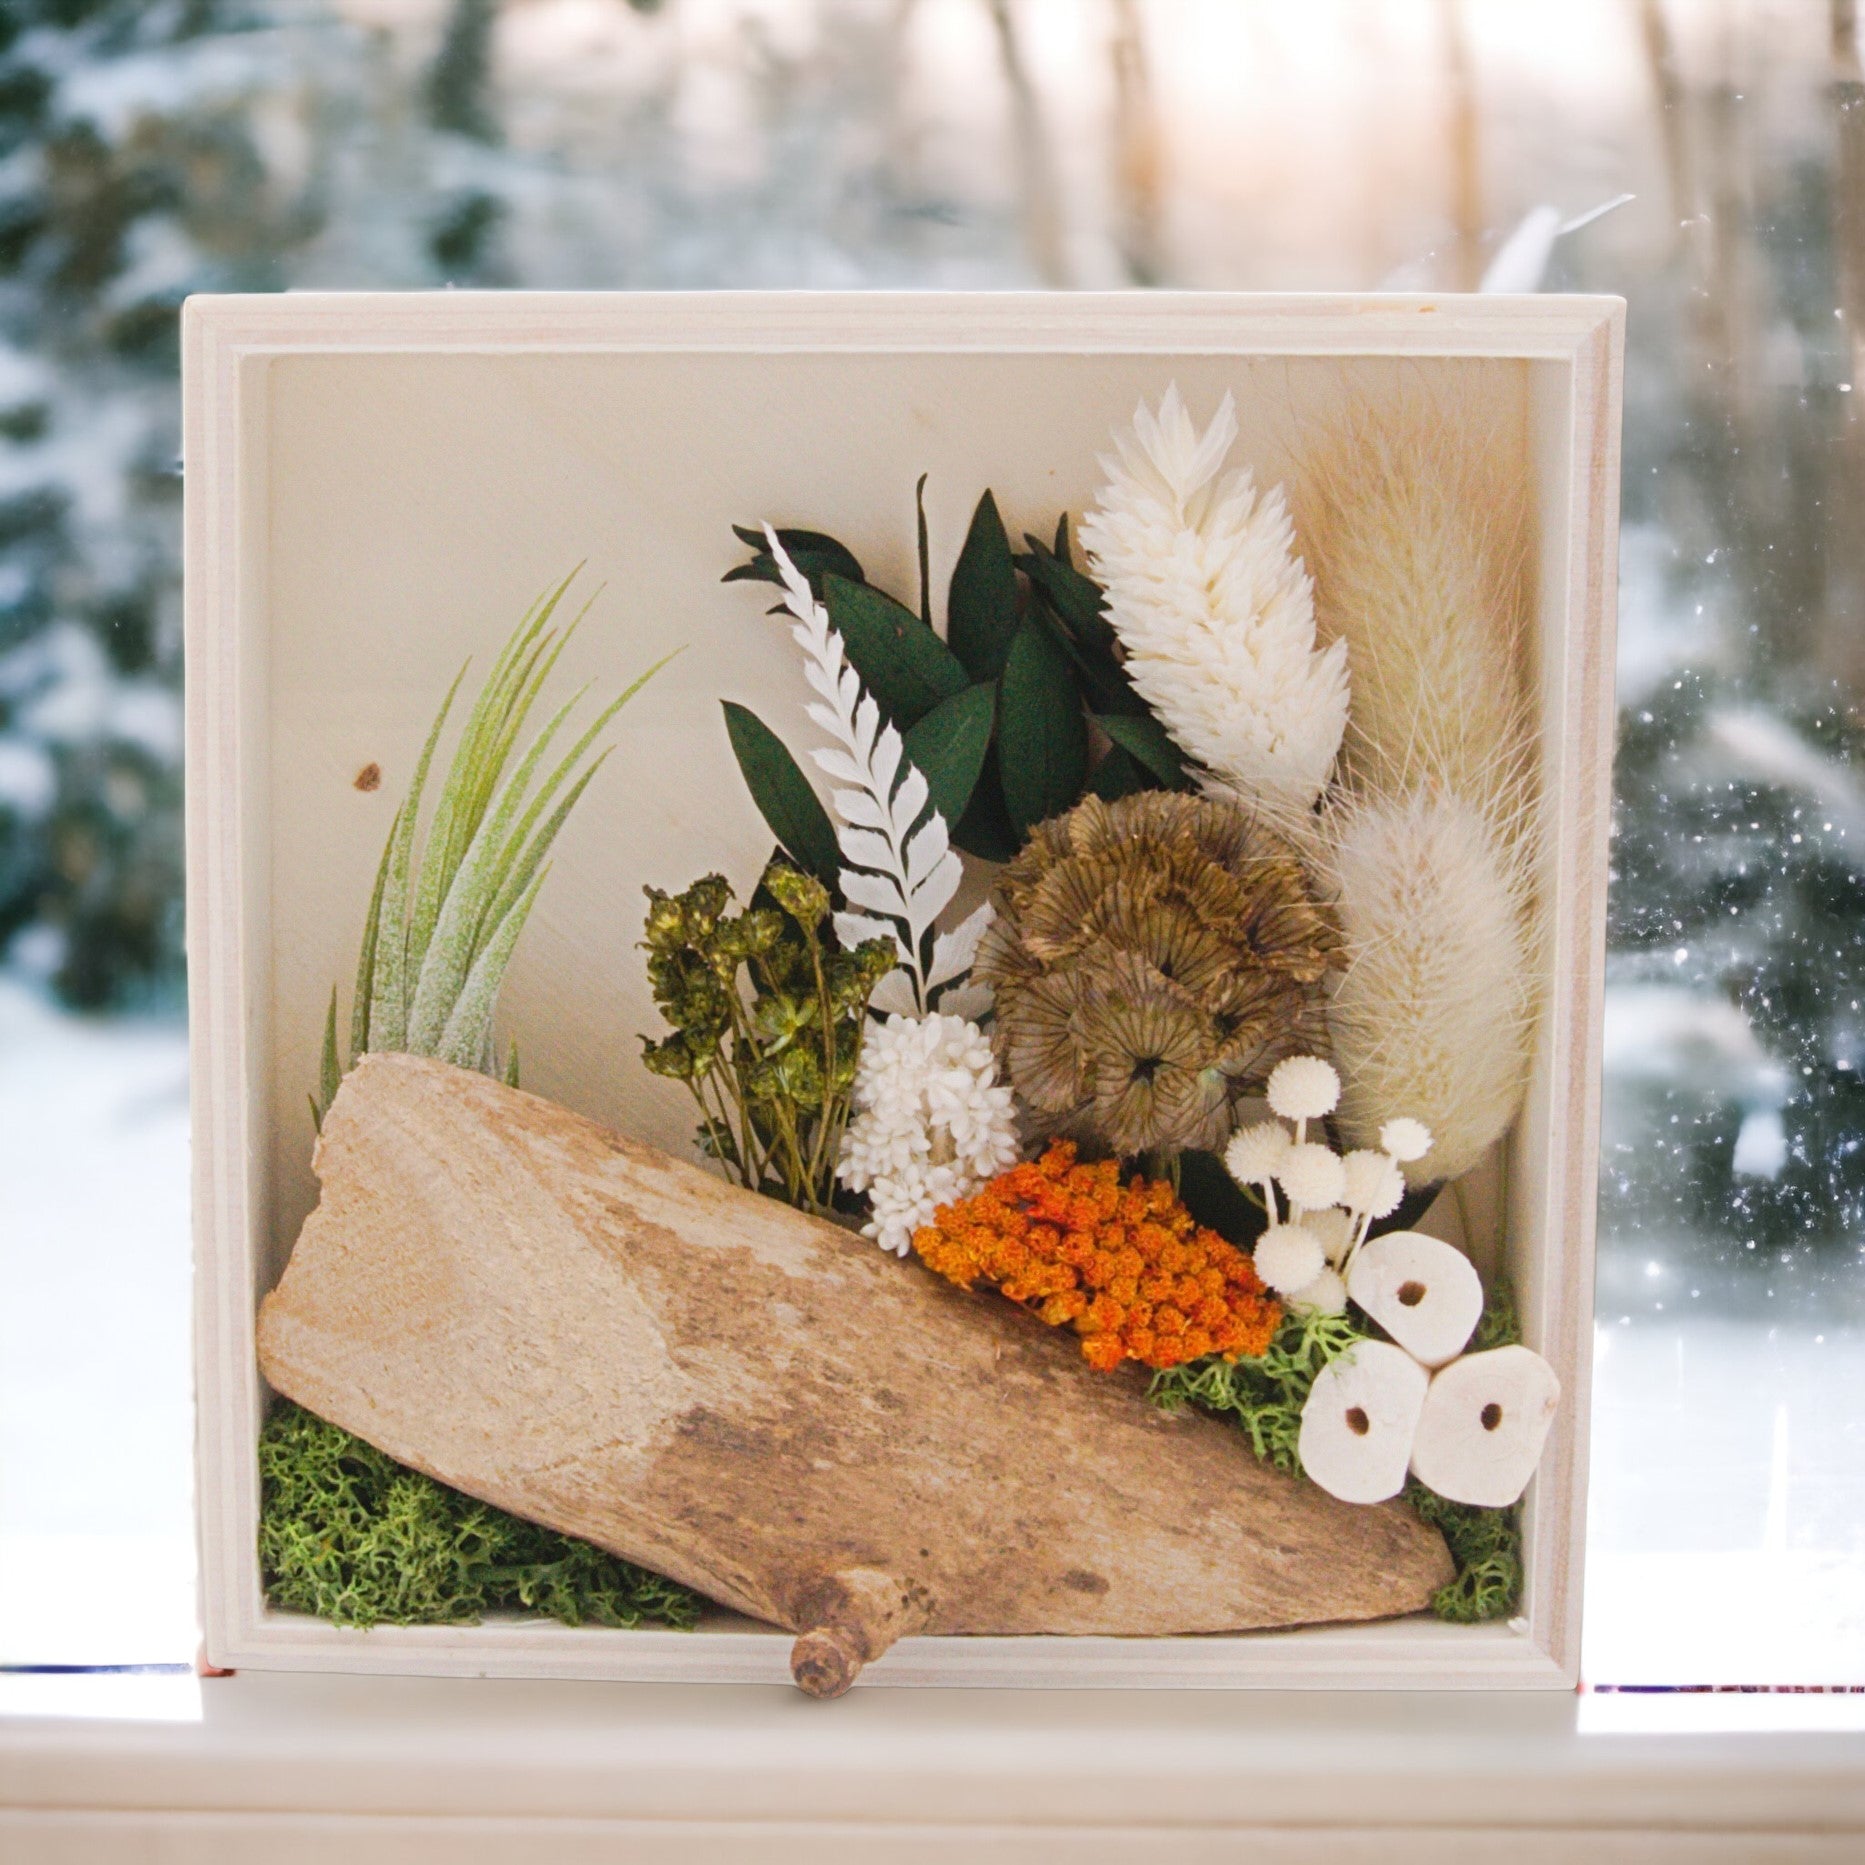 Square wooden box frame filled with dried flowers, wood, moss, dried mushrooms and an airplant